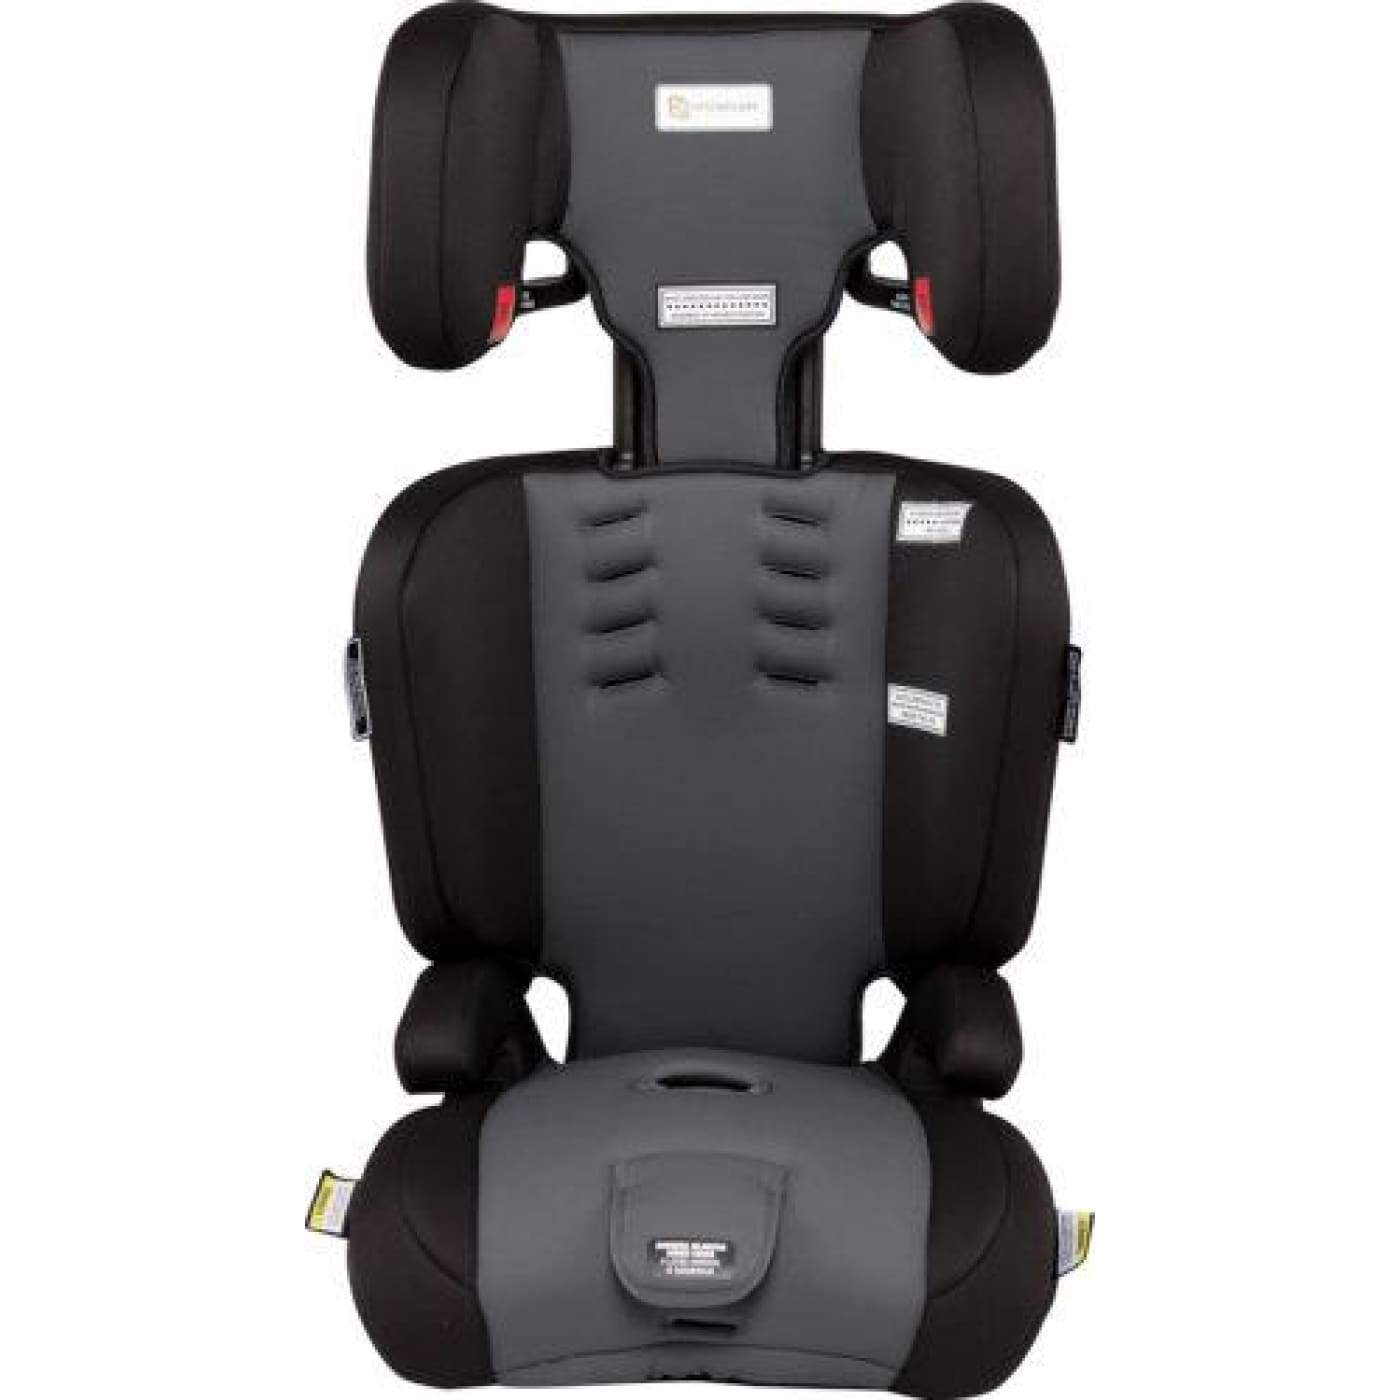 InfaSecure Visage Astra Convertible Booster 6M-8YR - Grey - CAR SEATS - CONV BOOSTERS (6M-8YR)